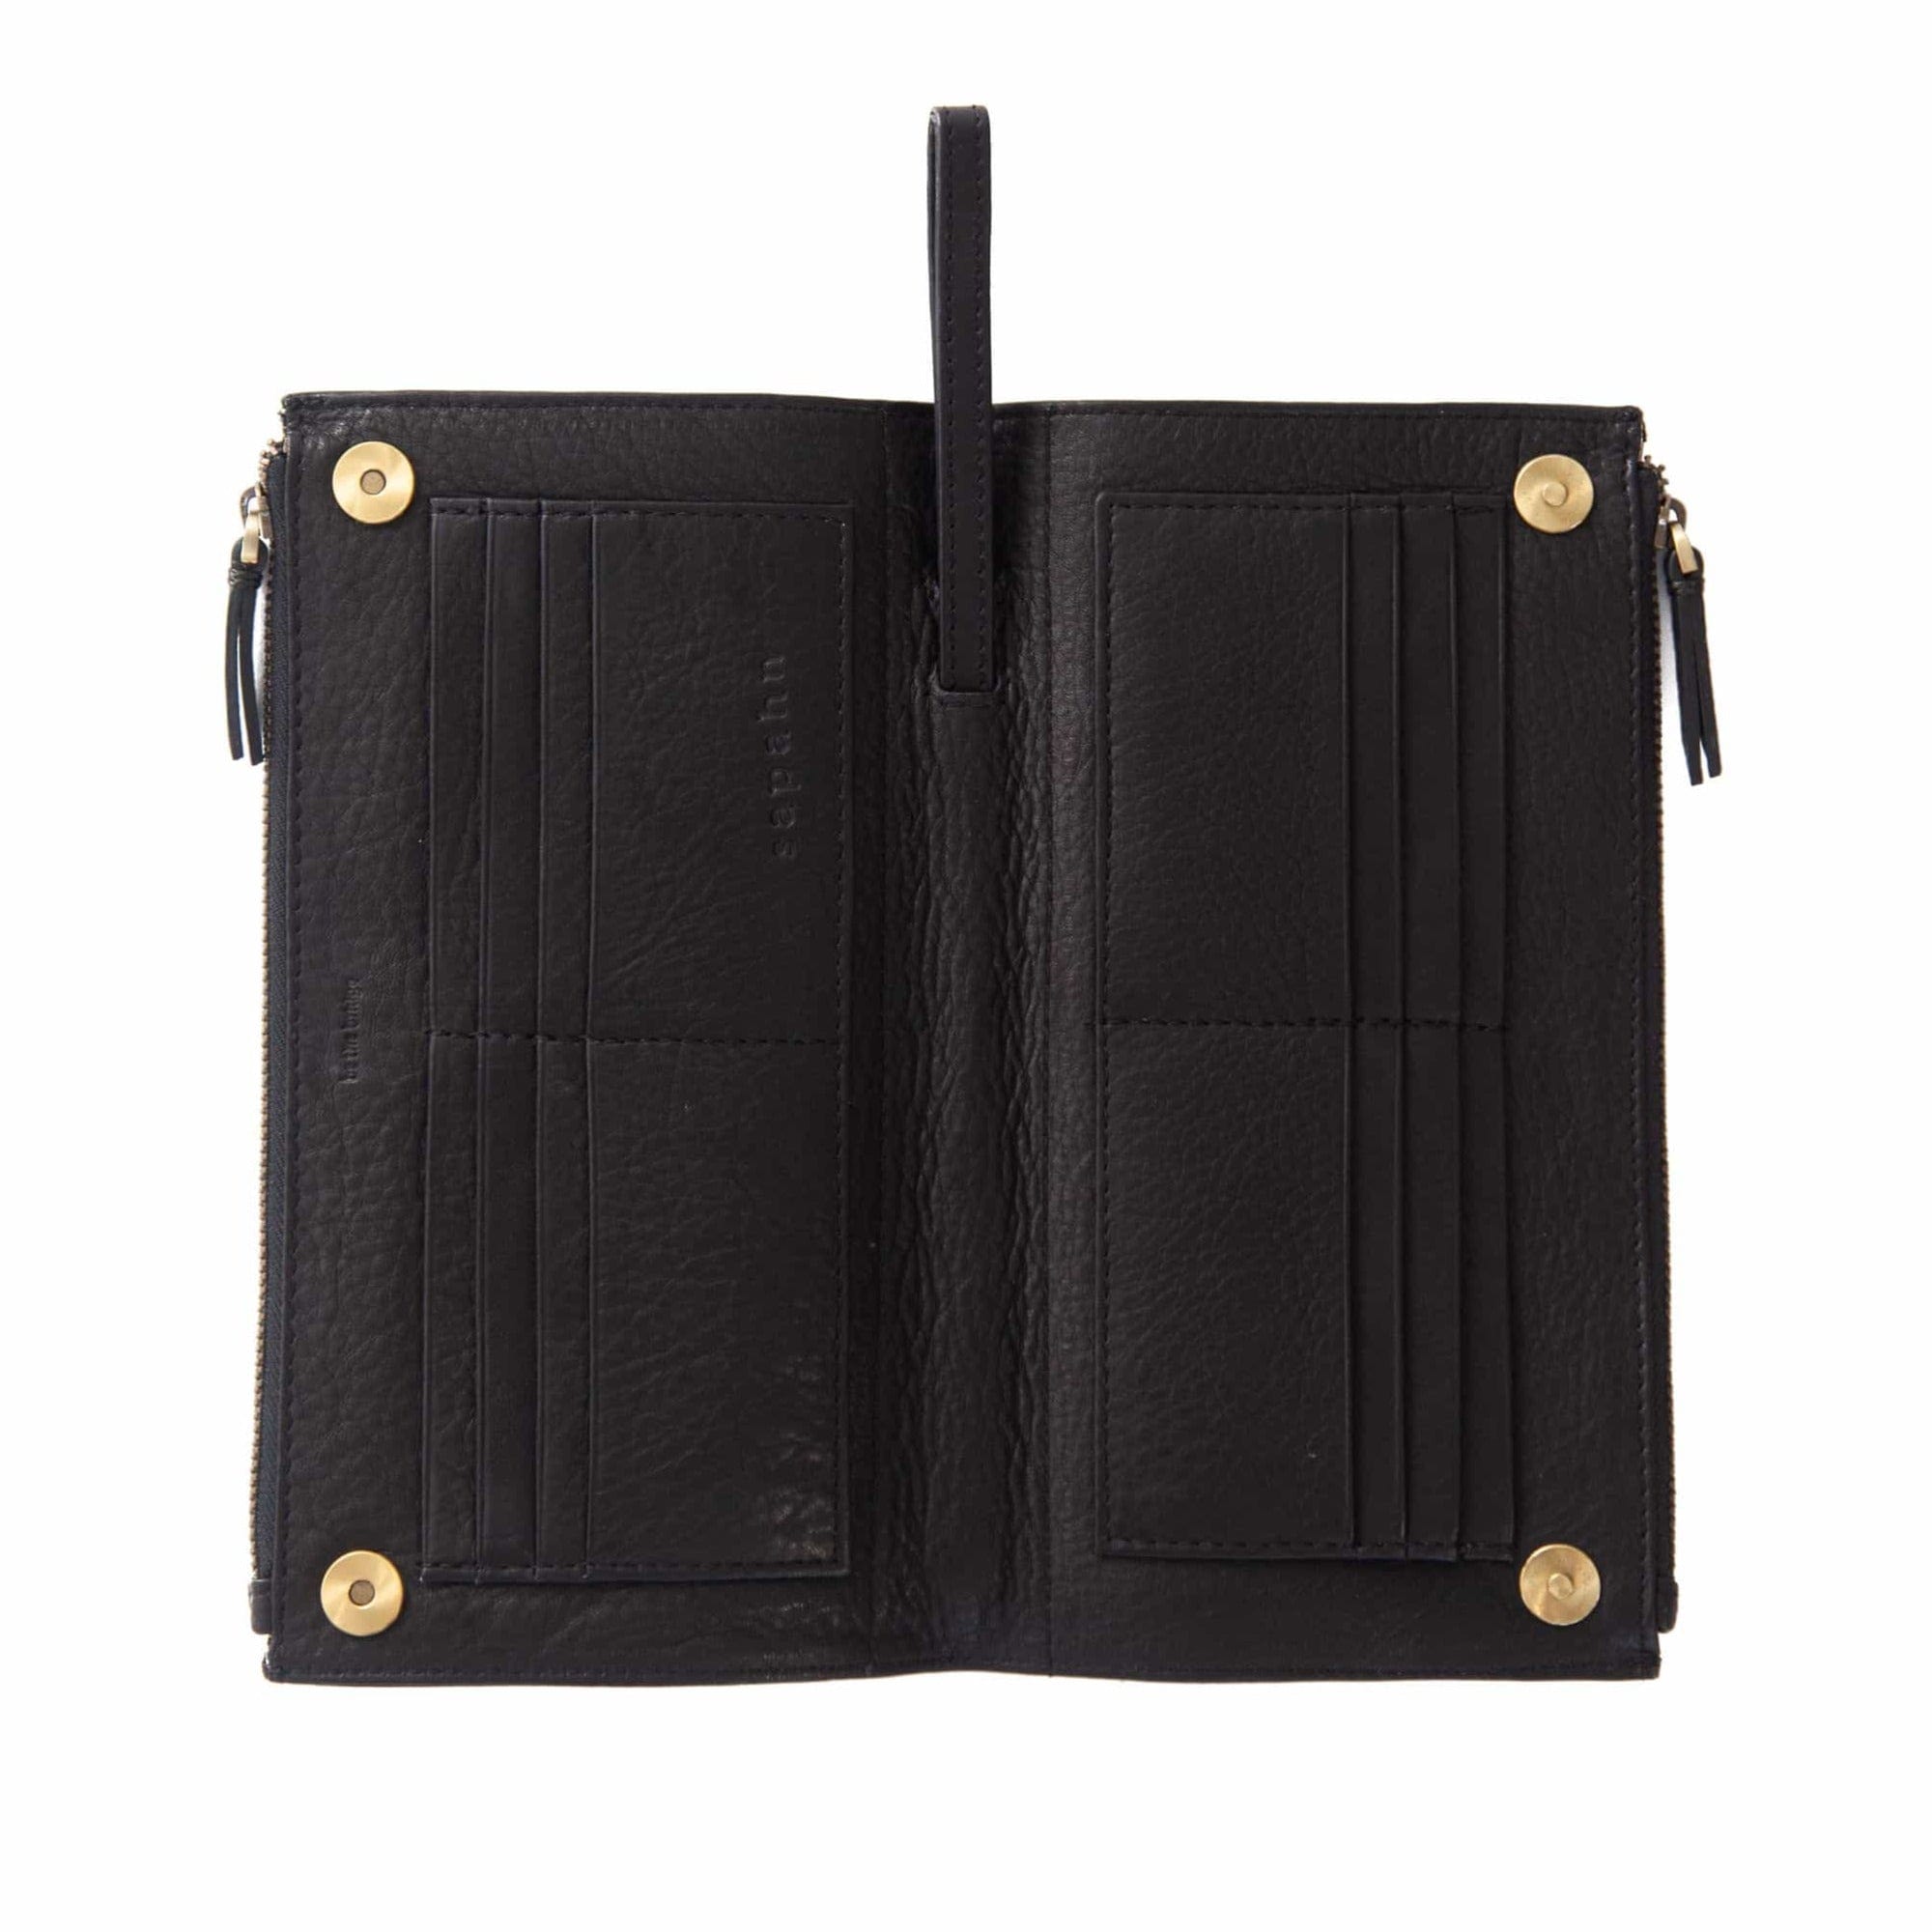 Lay the Parker deluxe wristlet wallet in black raw leather flat to see all 16 card slots at once.